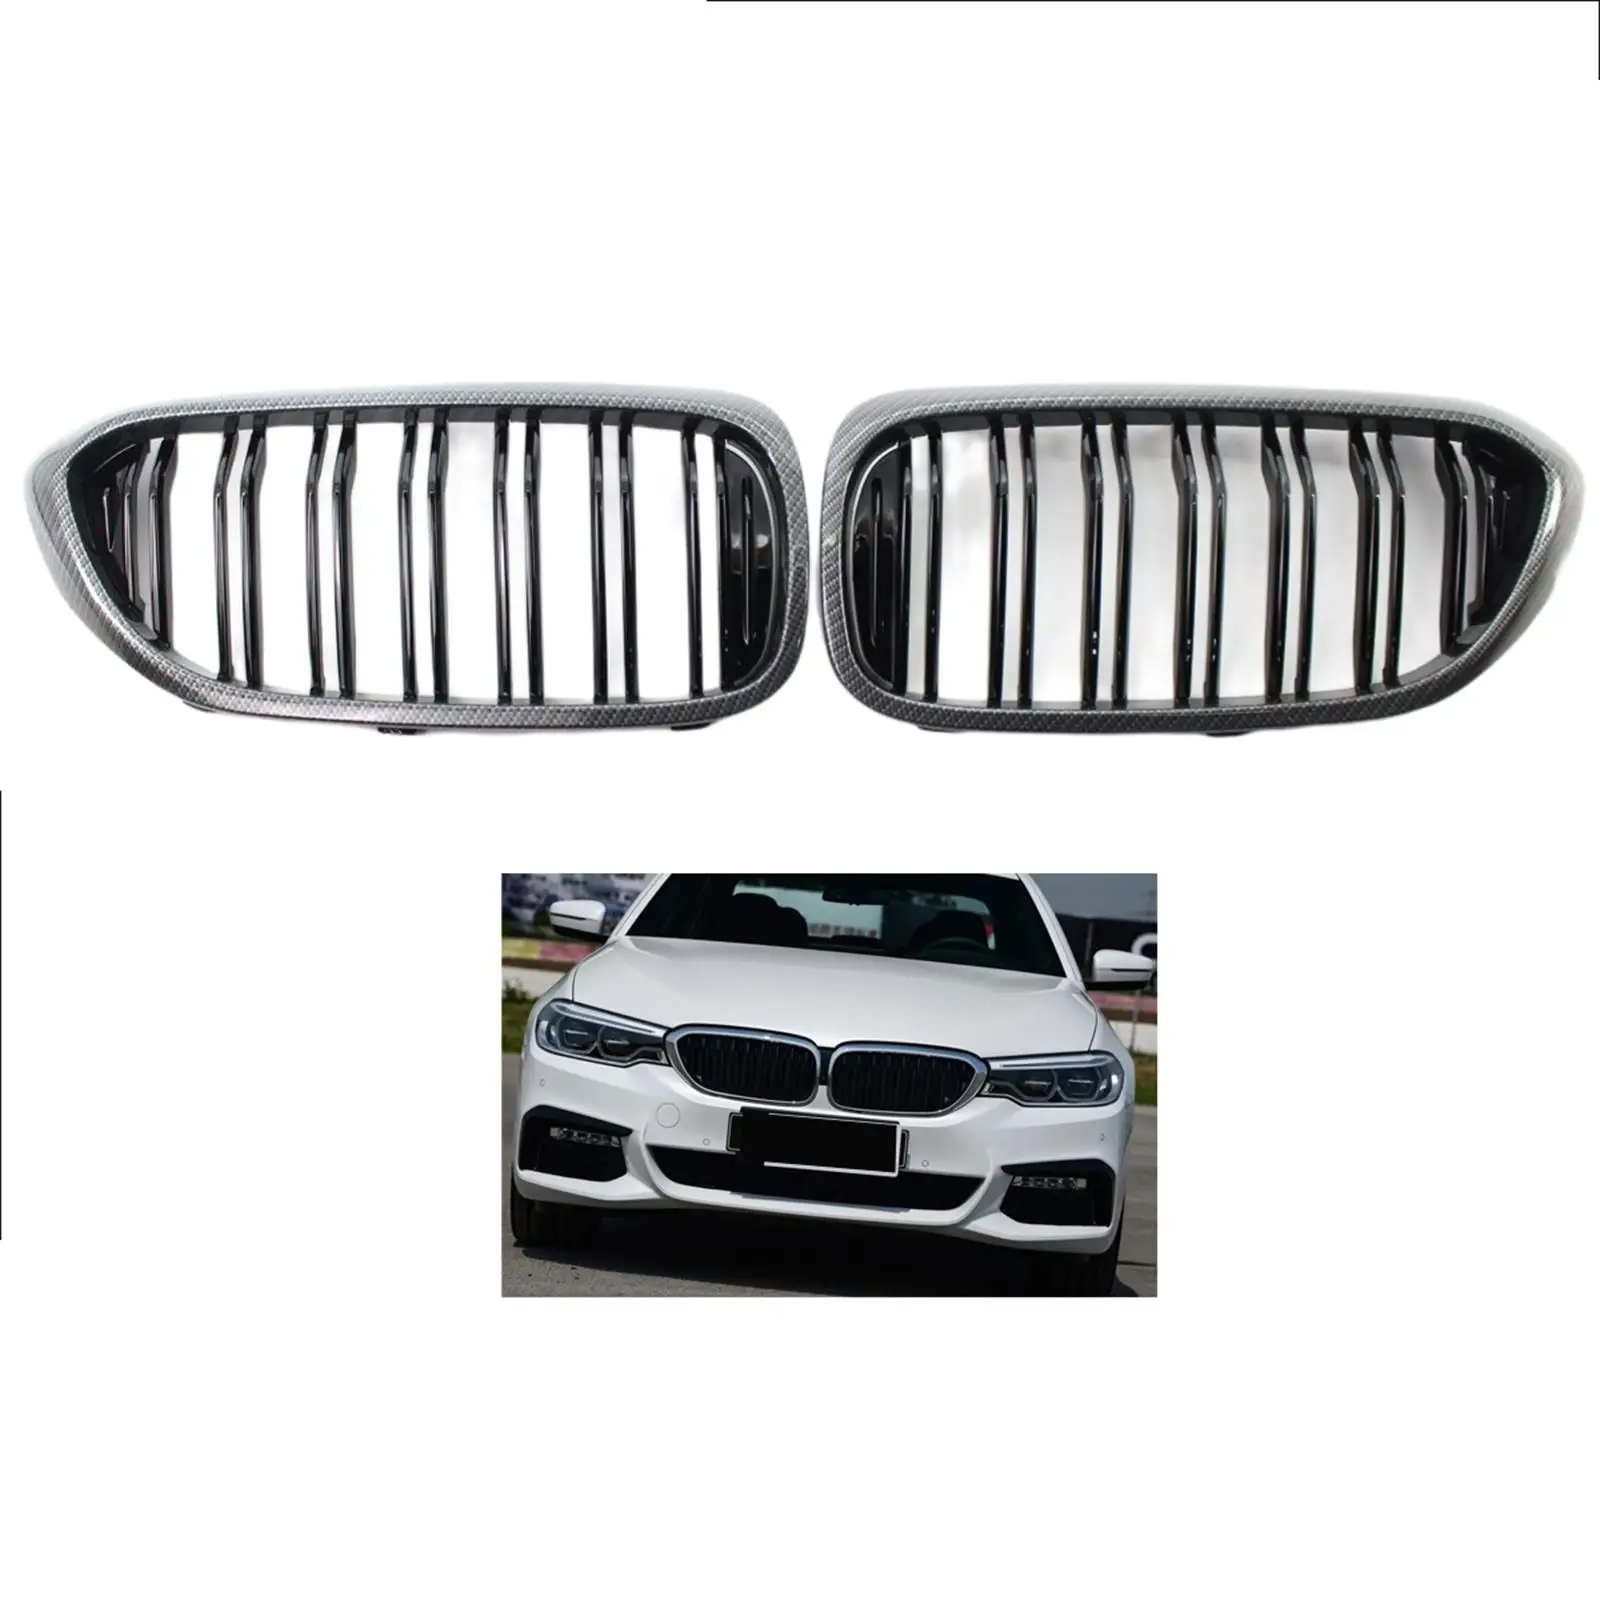 2 Pieces Car Front Kidney Grille Grill Bumper Grille Fit for BMW 5 Series G30 G31 G38 2017-19 520i 540i Accessories Spare Parts